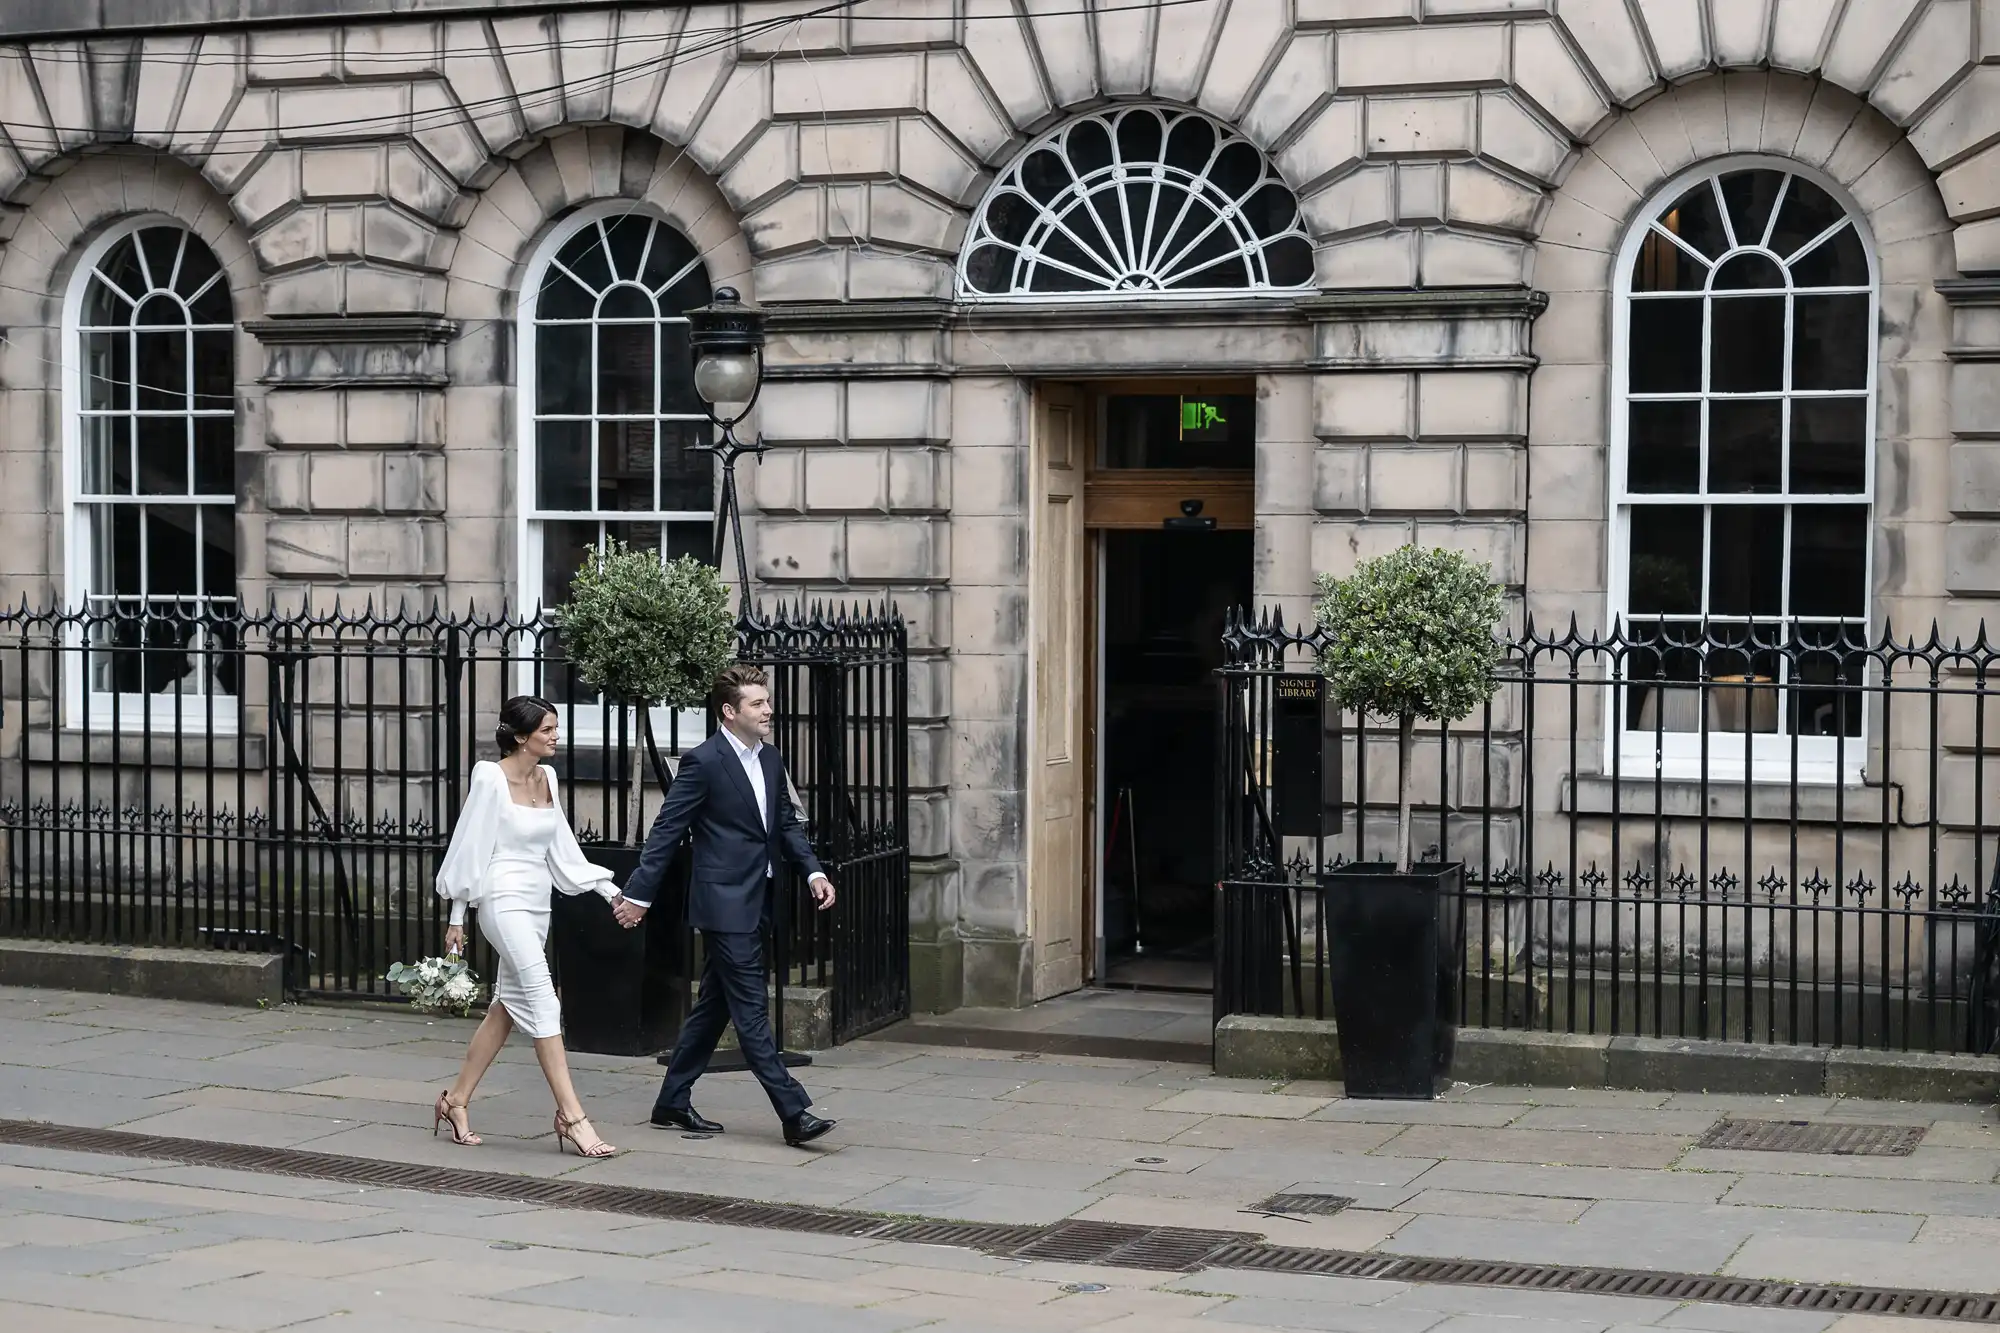 A couple dressed smartly, the woman in a white dress and the man in a suit, walking past an elegant building with arched doorways.